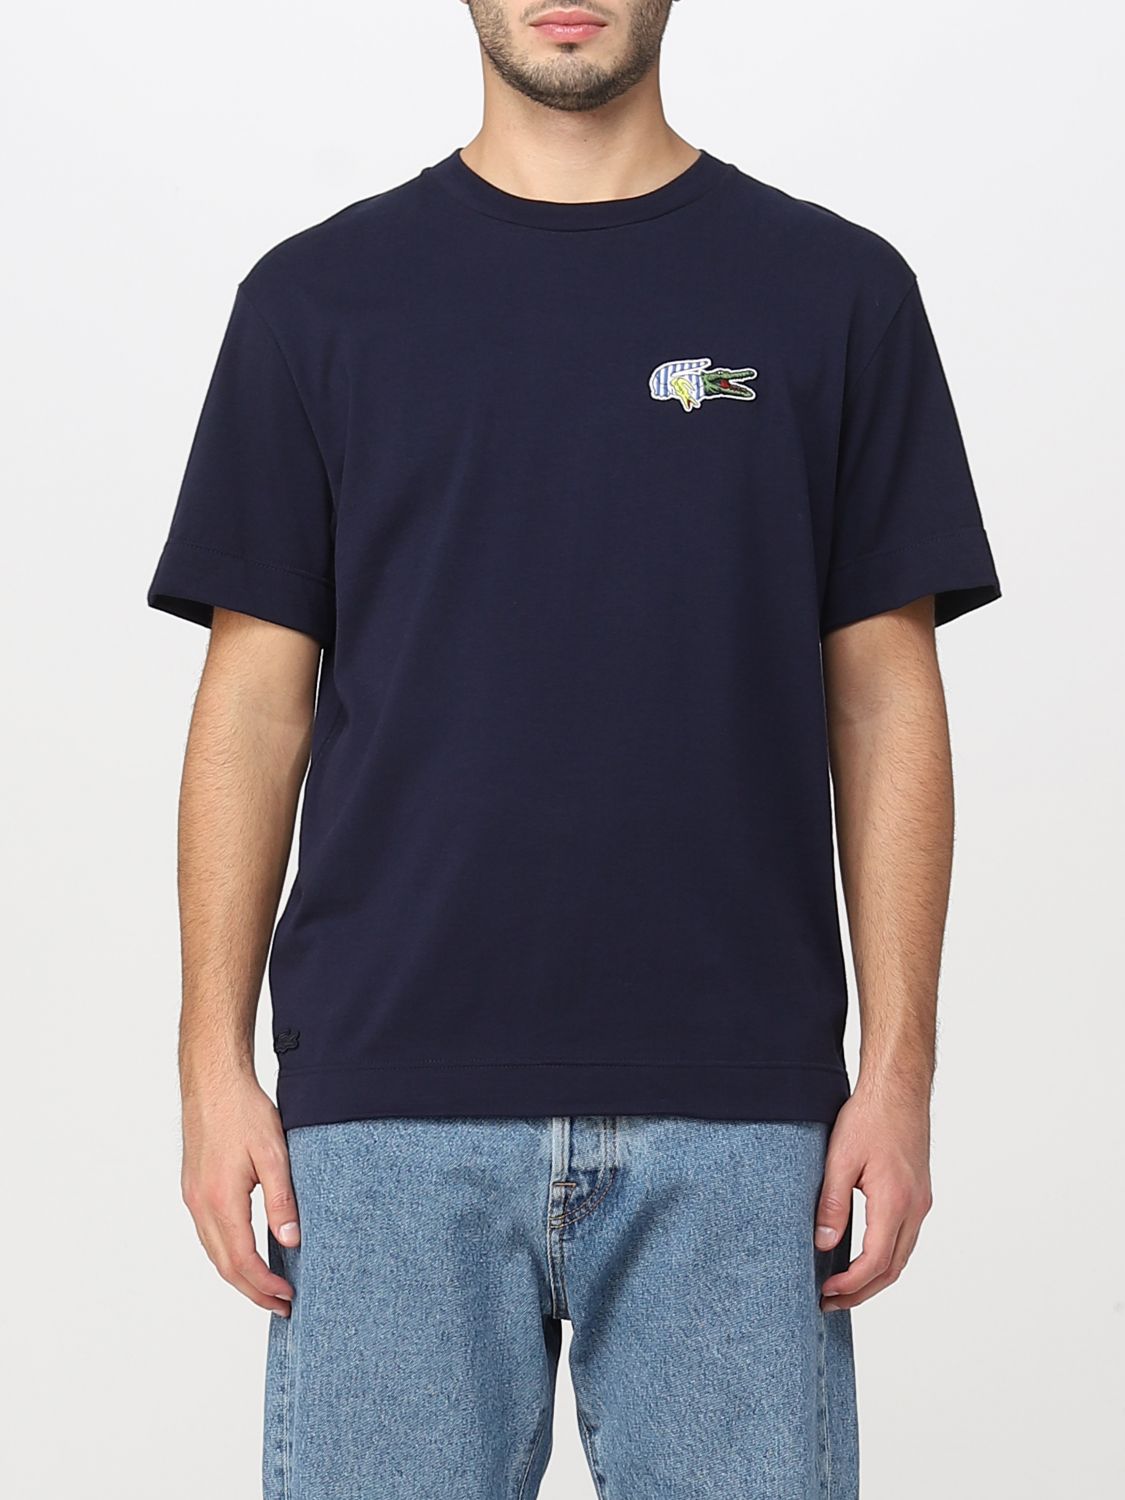 T-shirt Lacoste: Lacoste t-shirt for man navy 1